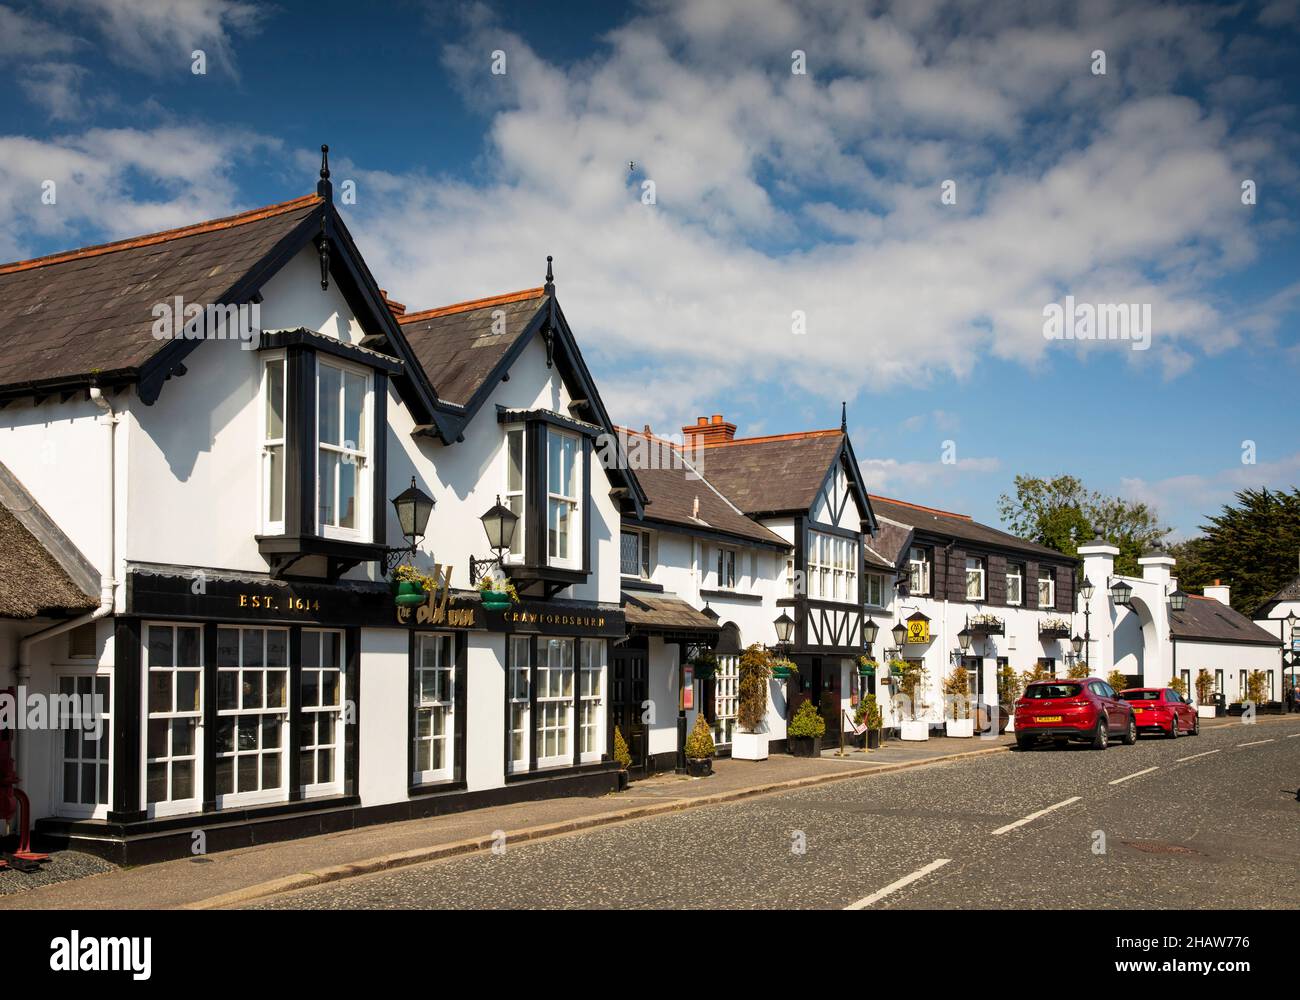 UK Northern Ireland, Co Down, Crawfordsburn, Main Street, New Inn, famous old coaching inn on former ferry route to Belfast Stock Photo